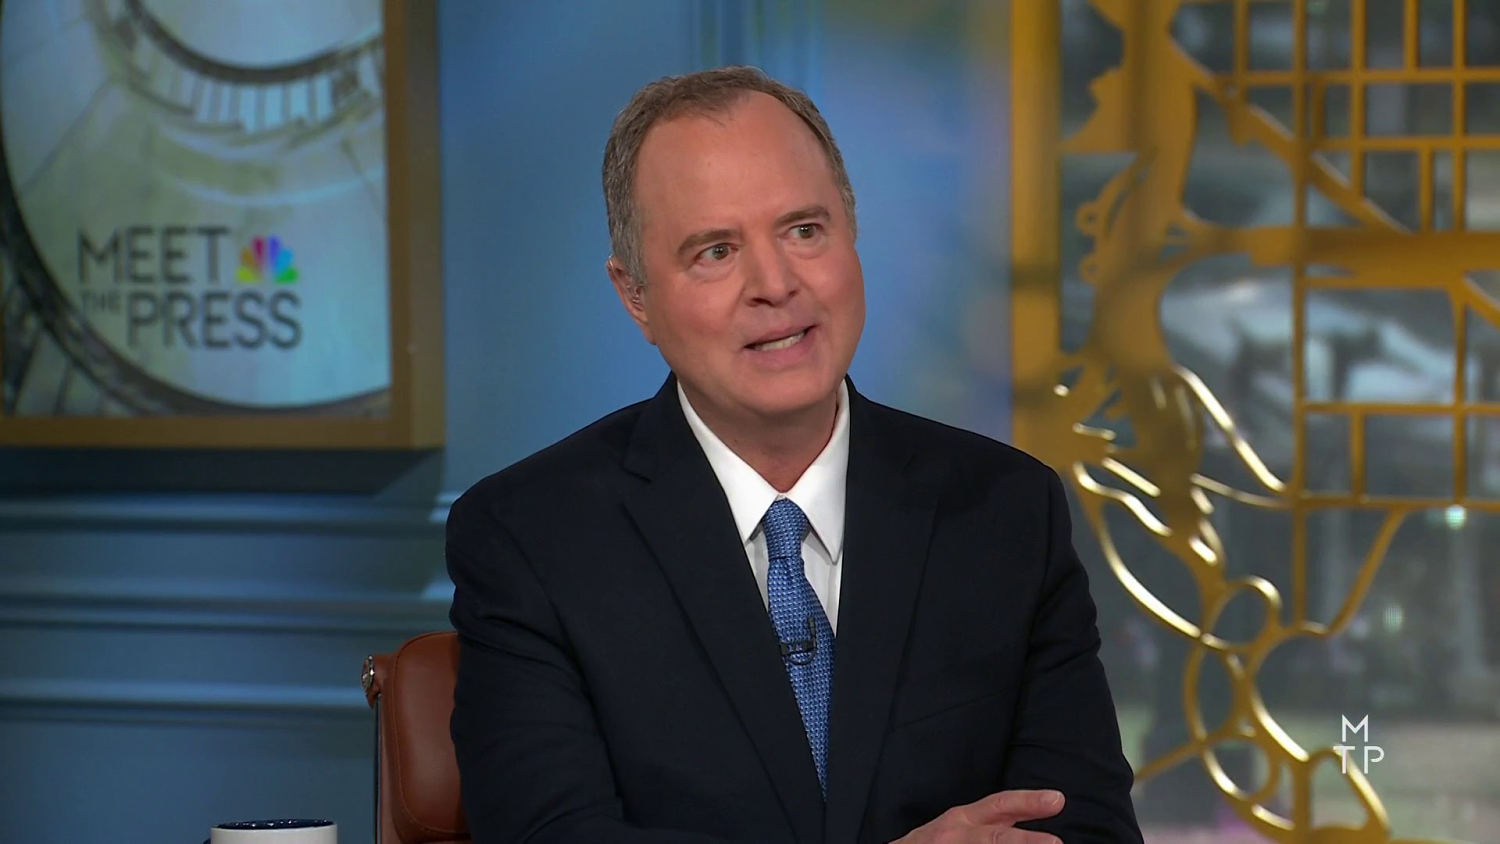 Rep. Adam Schiff says Biden needs to ‘win overwhelmingly’ or ‘pass the torch’: Full interview